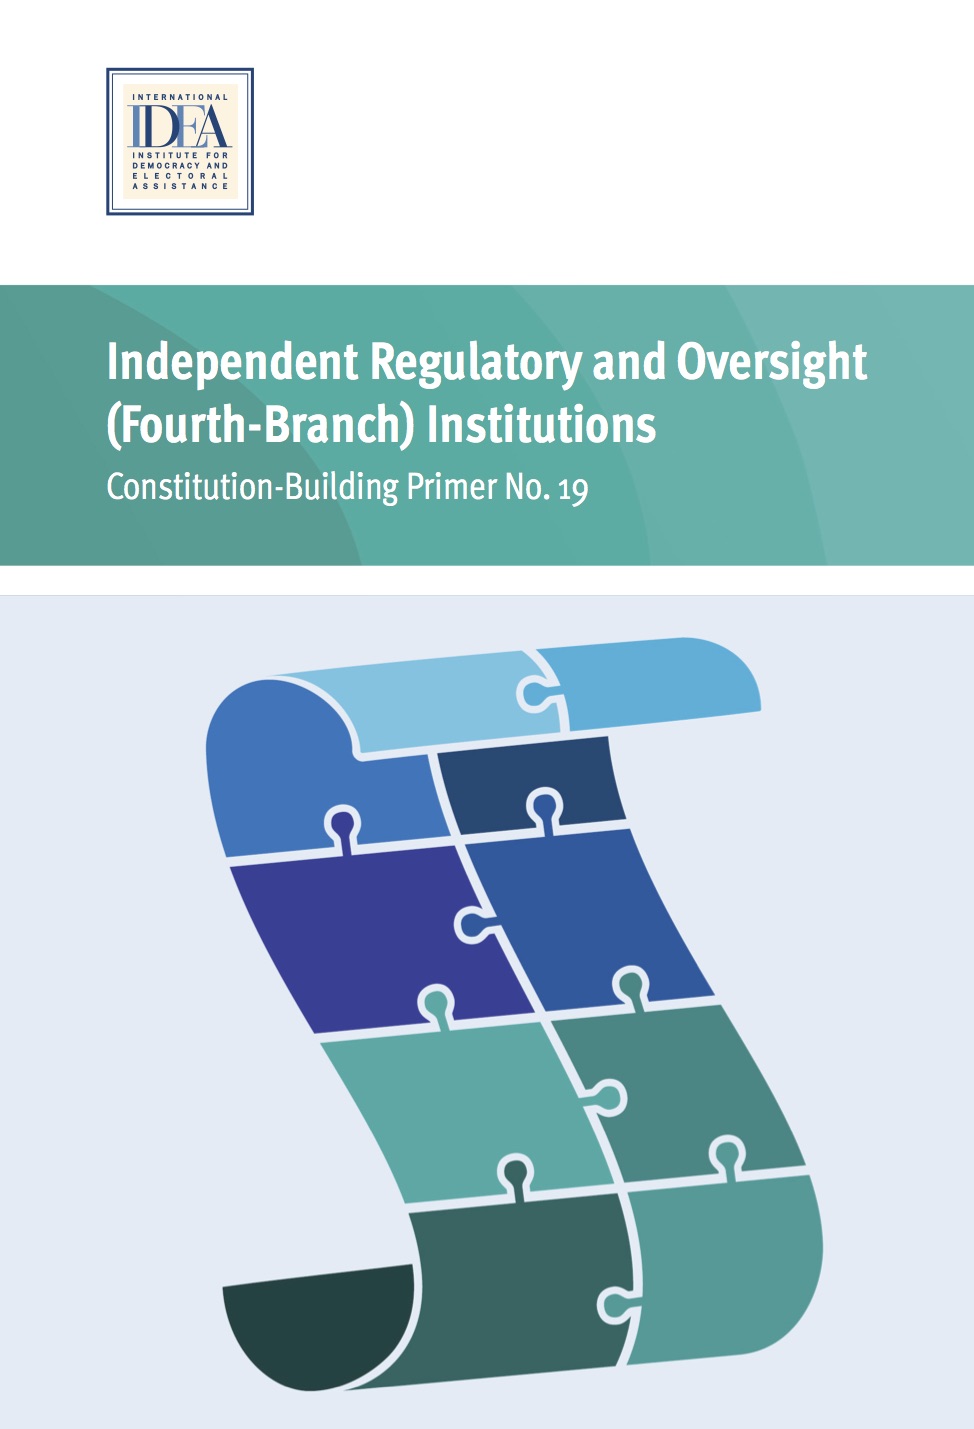 Independent Regulatory and Oversight (Fourth-Branch) Institutions